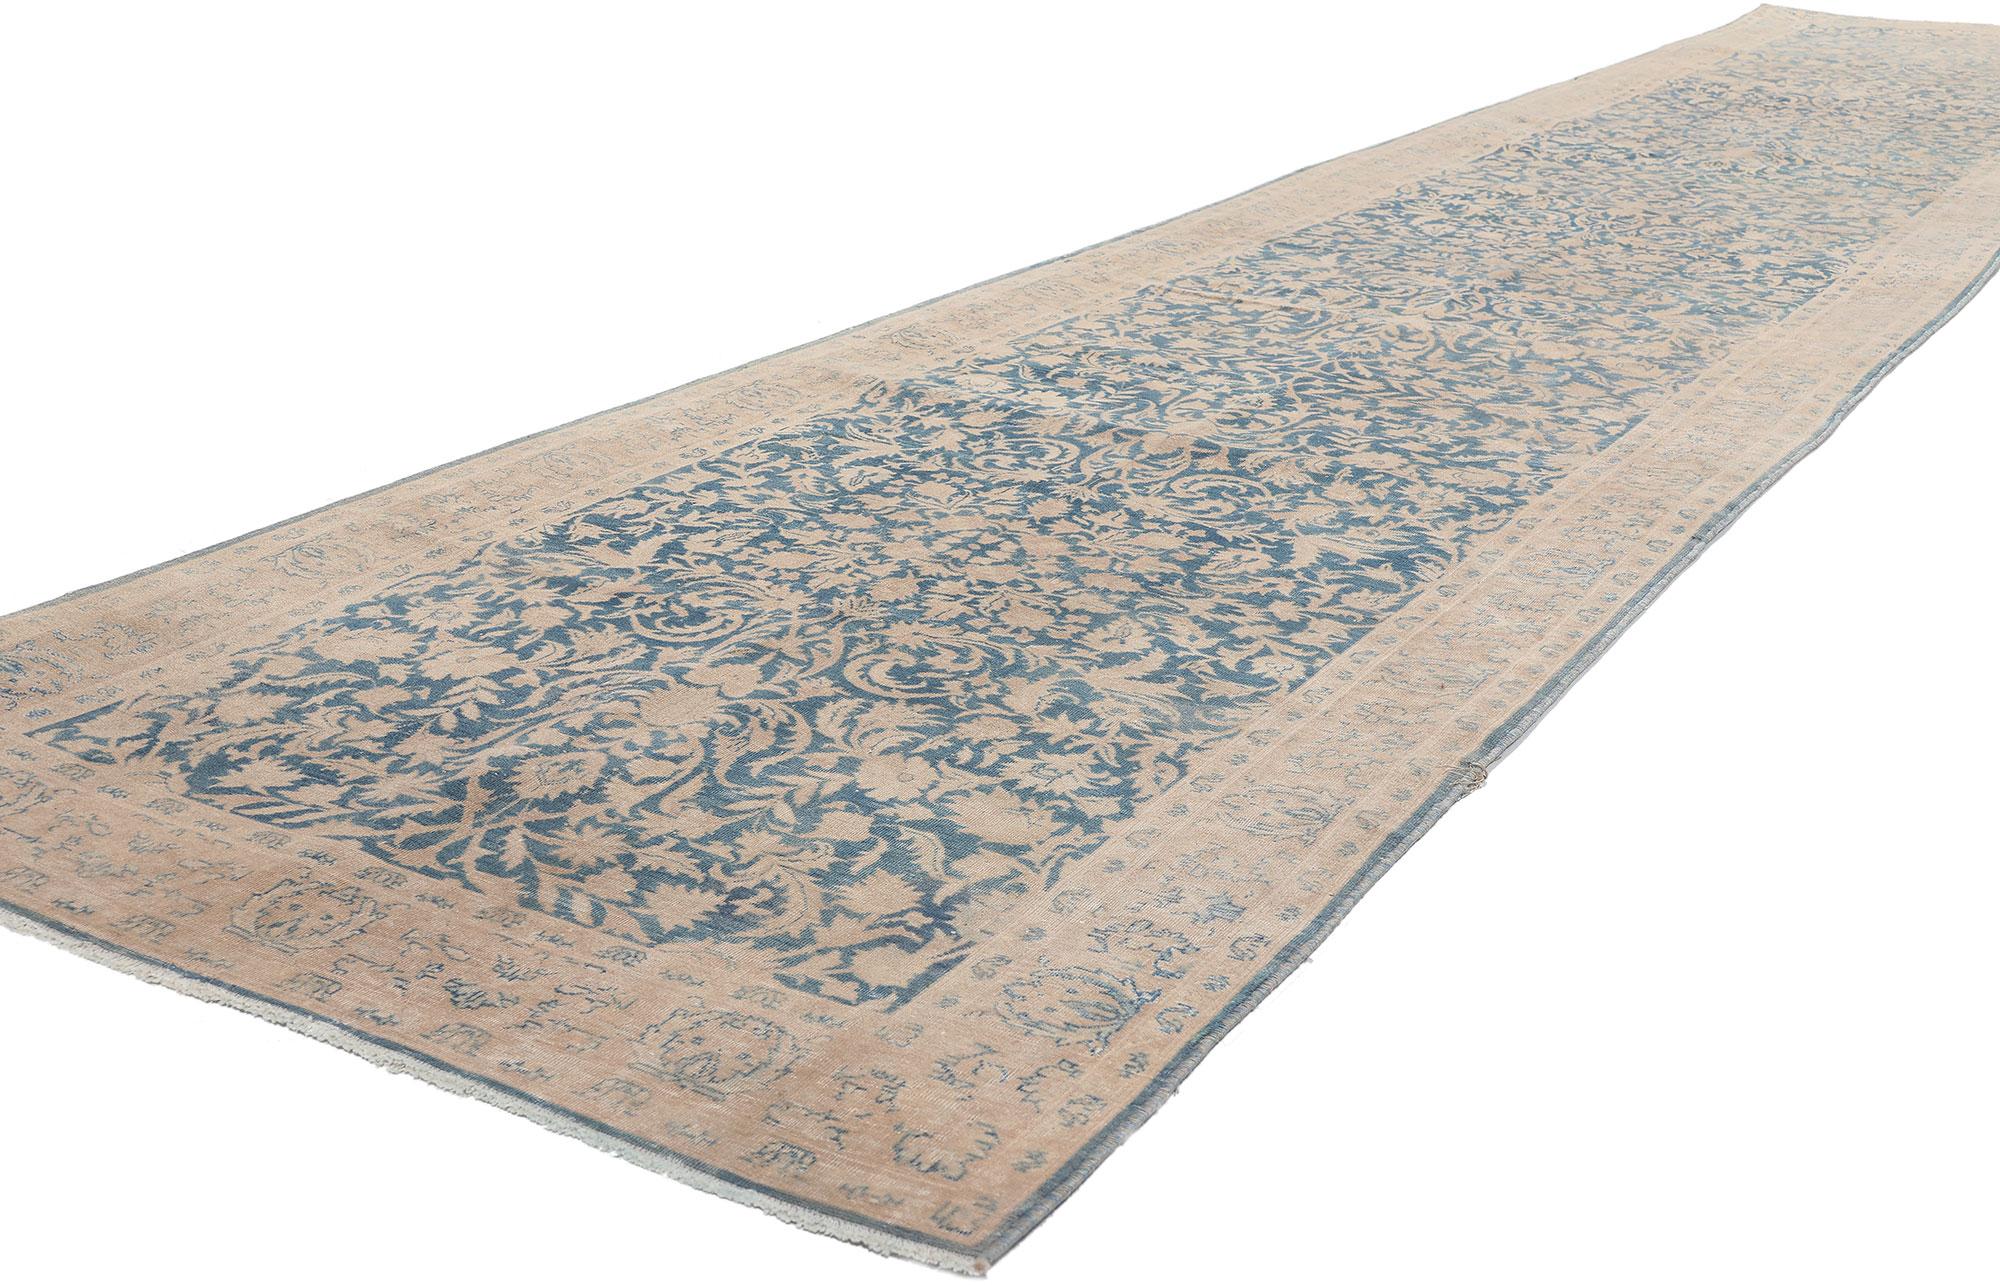 53866 Antique Persian Kashan Runner, 03'00 x 15'10.
Distressed. Desirable Age Wear.
Abrash. Antique Wash.
Hand knotted wool.
Made in Iran.
Measures: 03'00 x 15'10.
Date: 1920s. Early 20th Century.